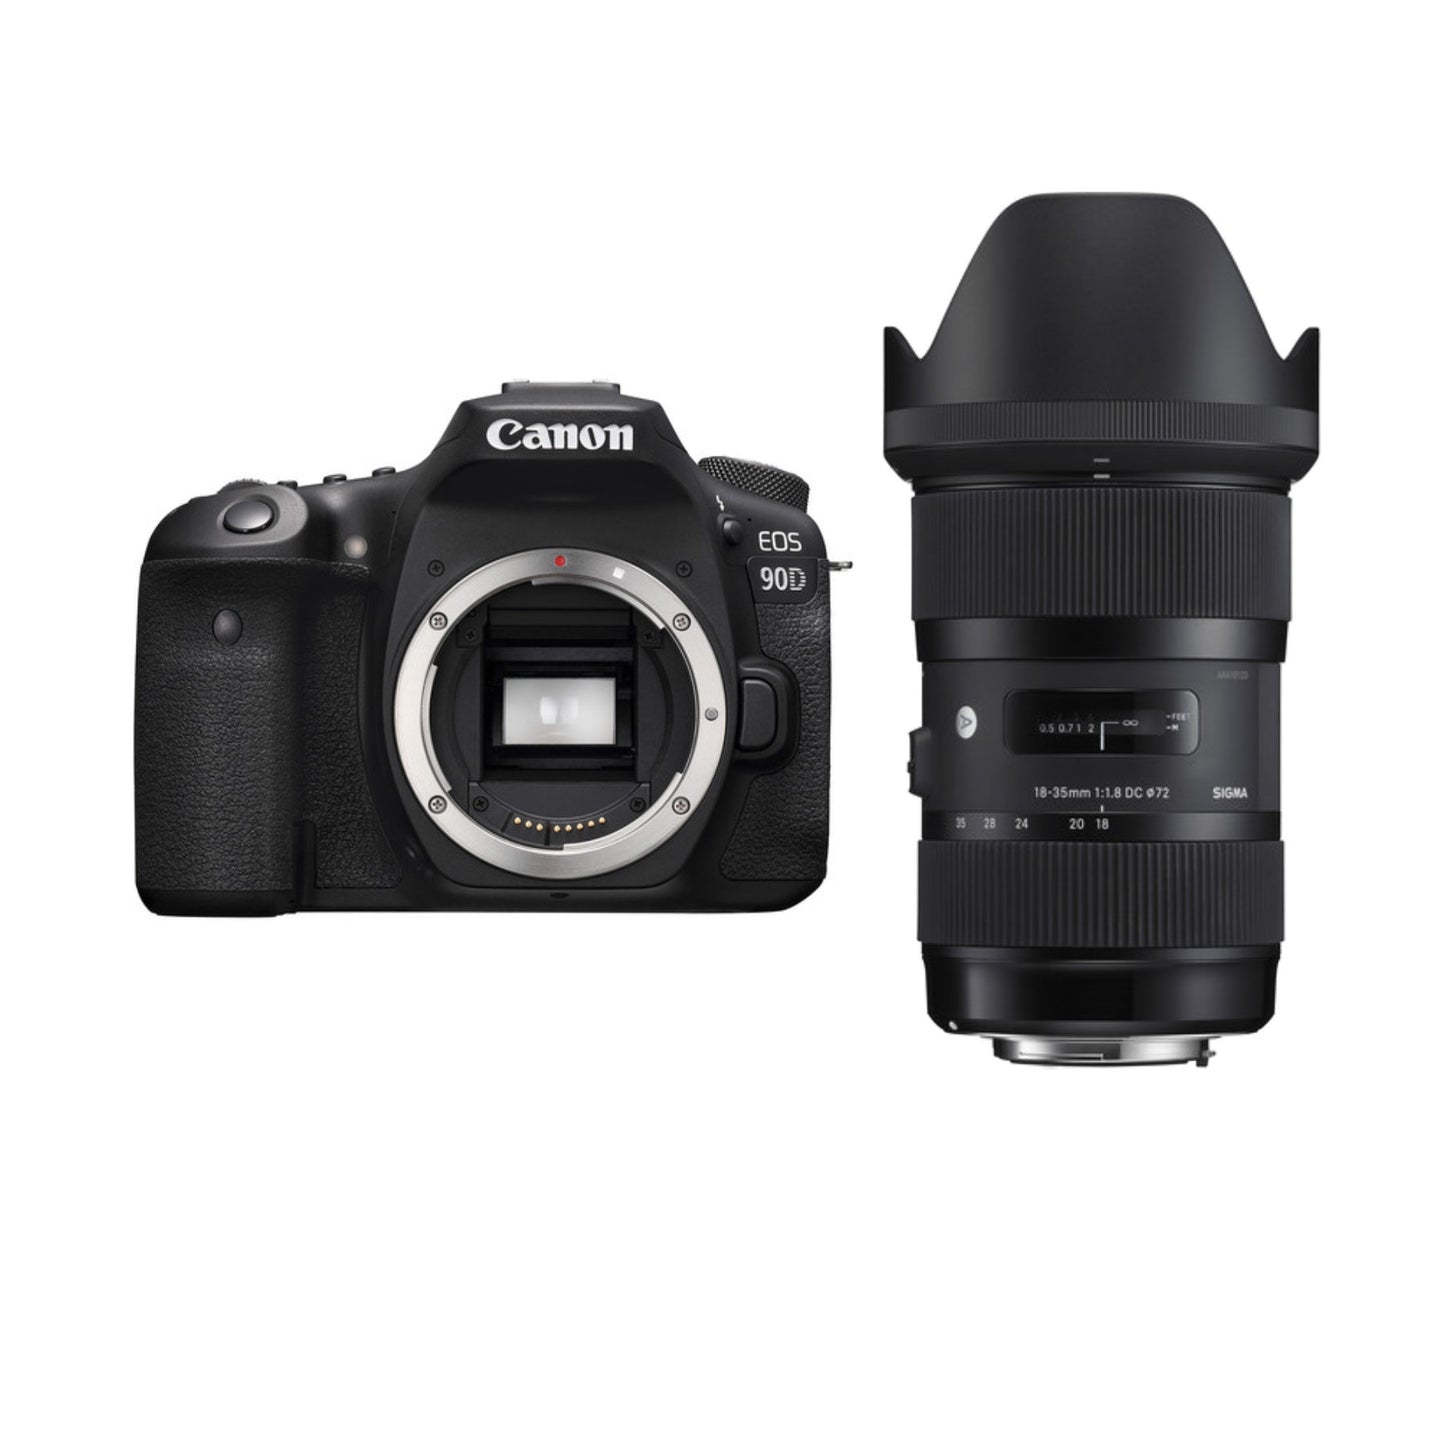 Canon 90D with Sigma 18-35mm Lens